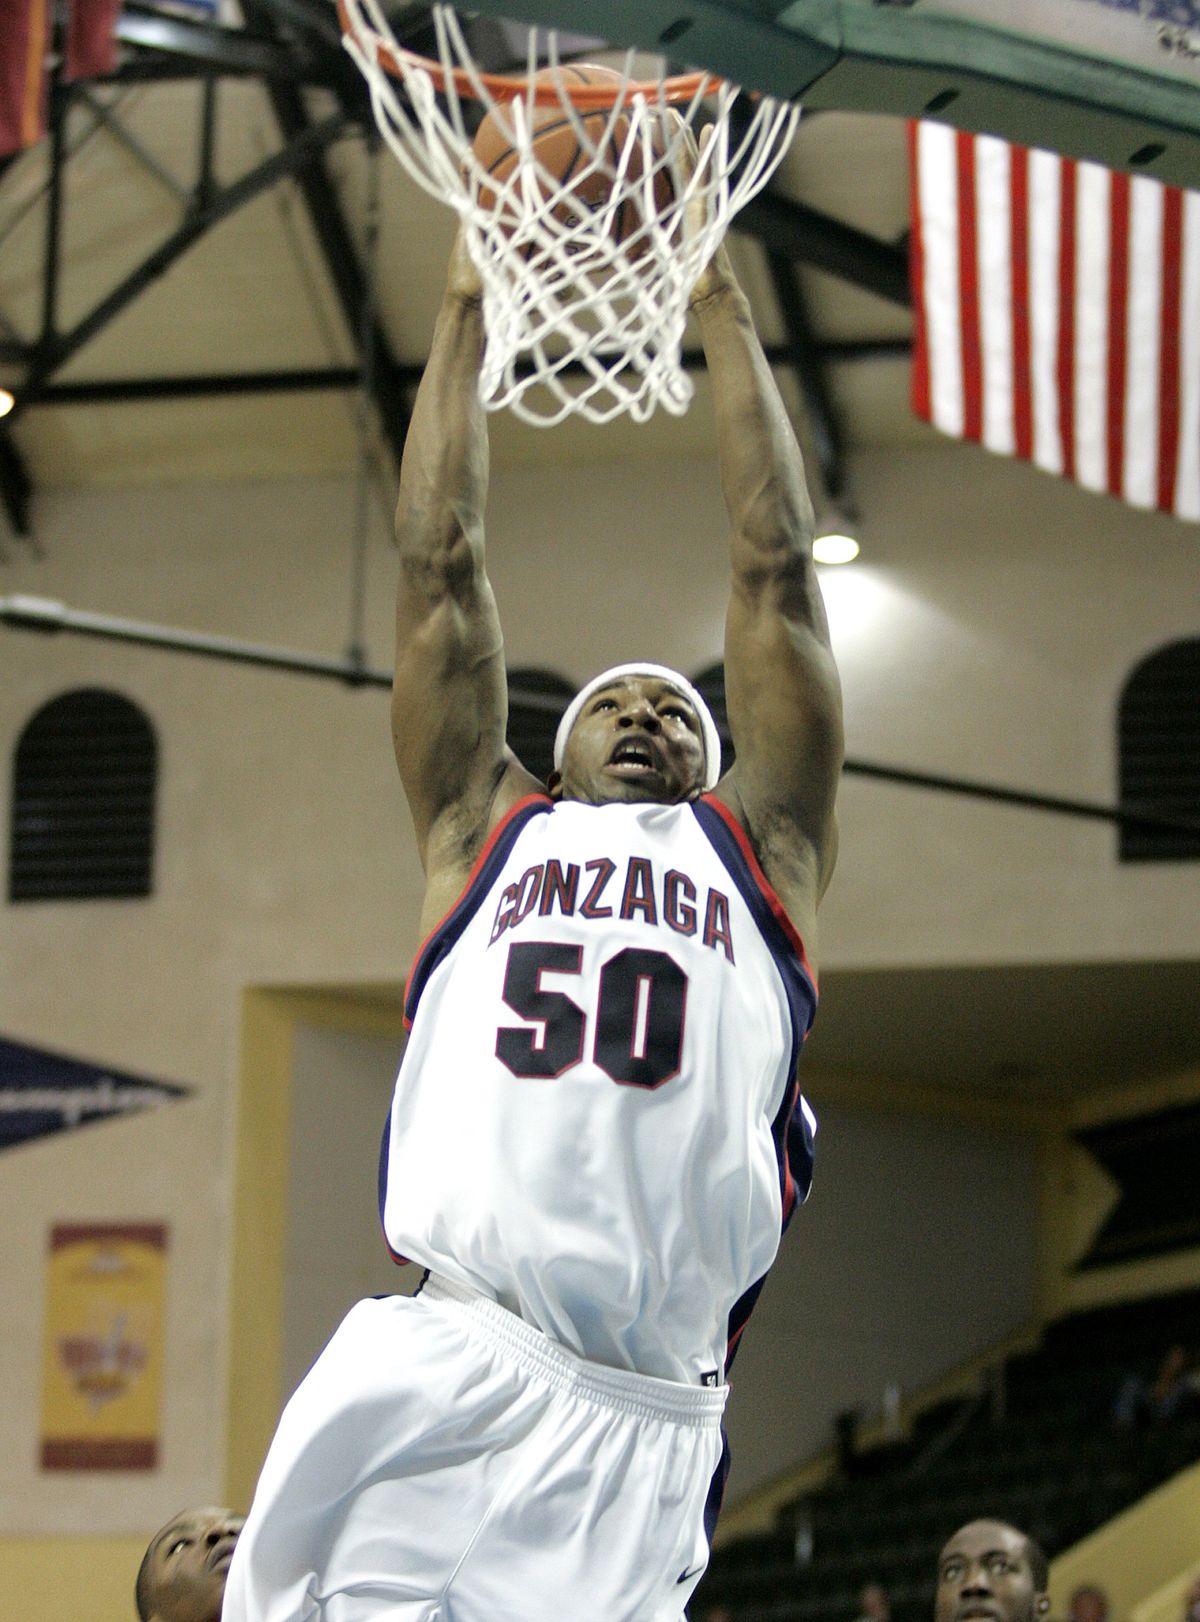 Gonzaga forward Ira Brown played a big role in the Zags’ win. (Associated Press / The Spokesman-Review)